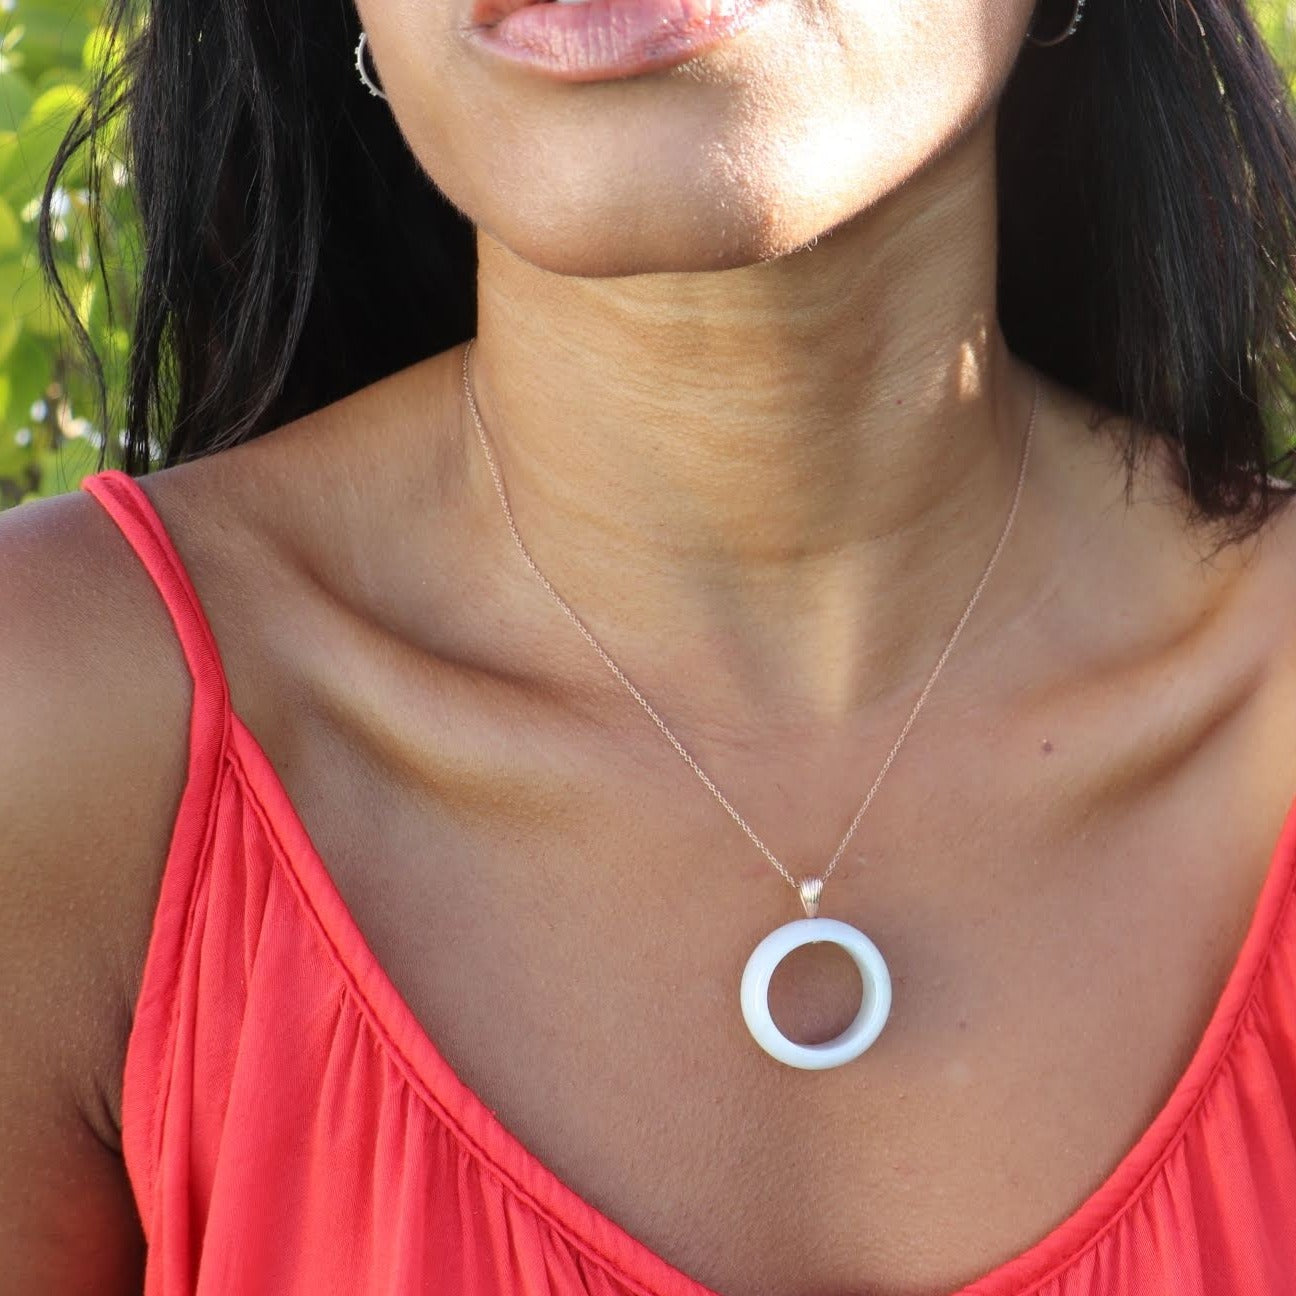 woman wearing orange top and wearing white jade ring necklace from the wandering jewel